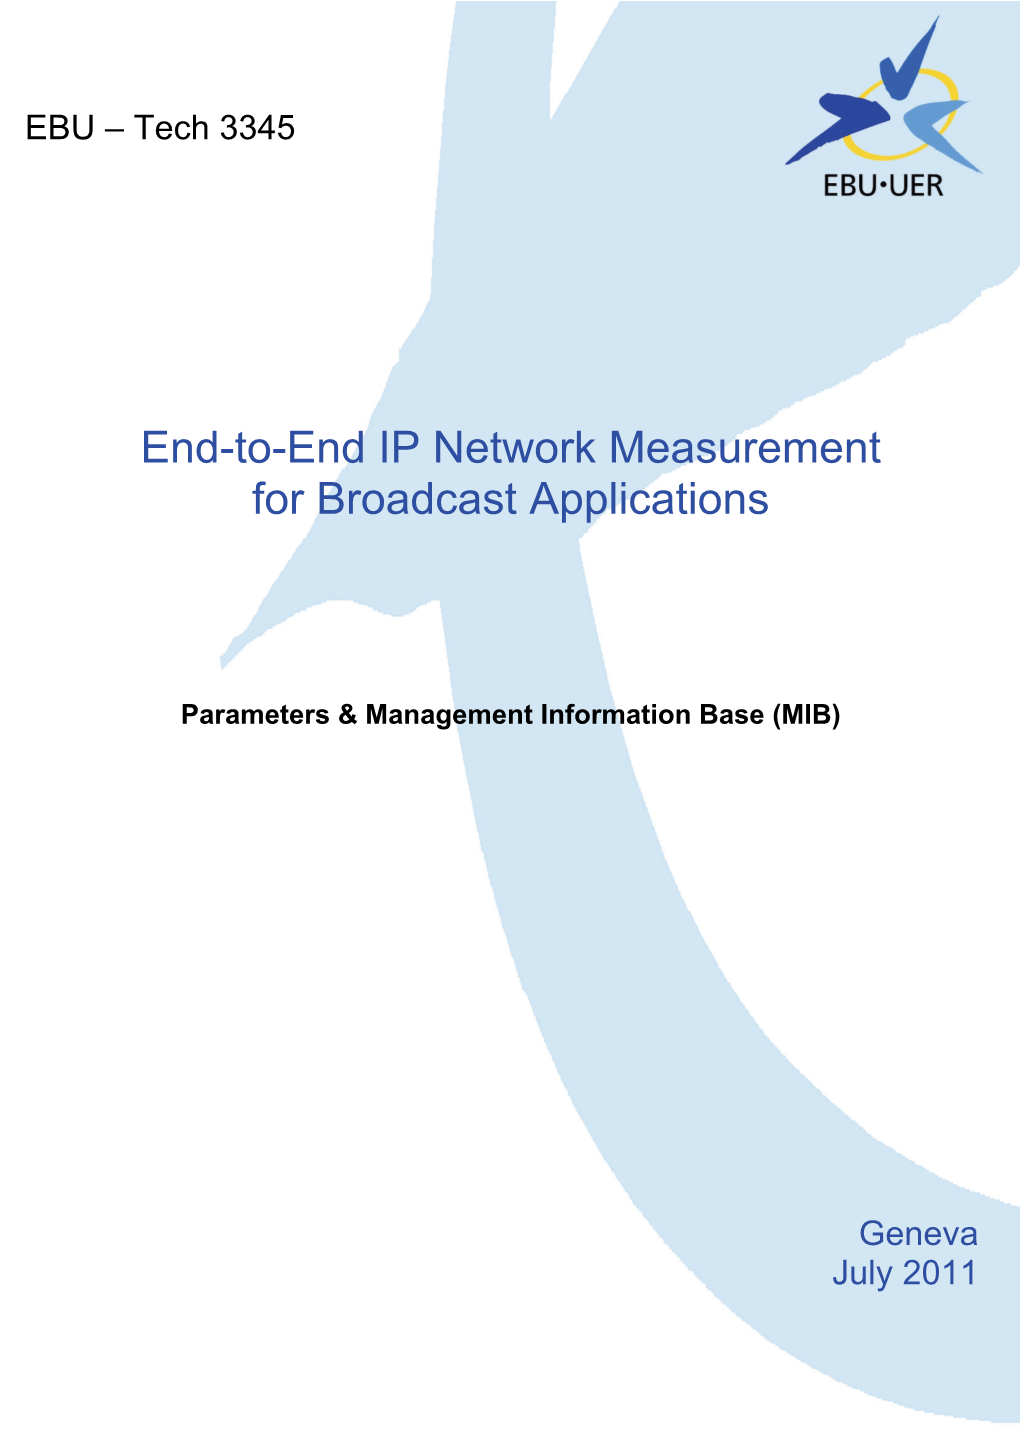 End-To-End IP Network Measurement for Broadcast Applications